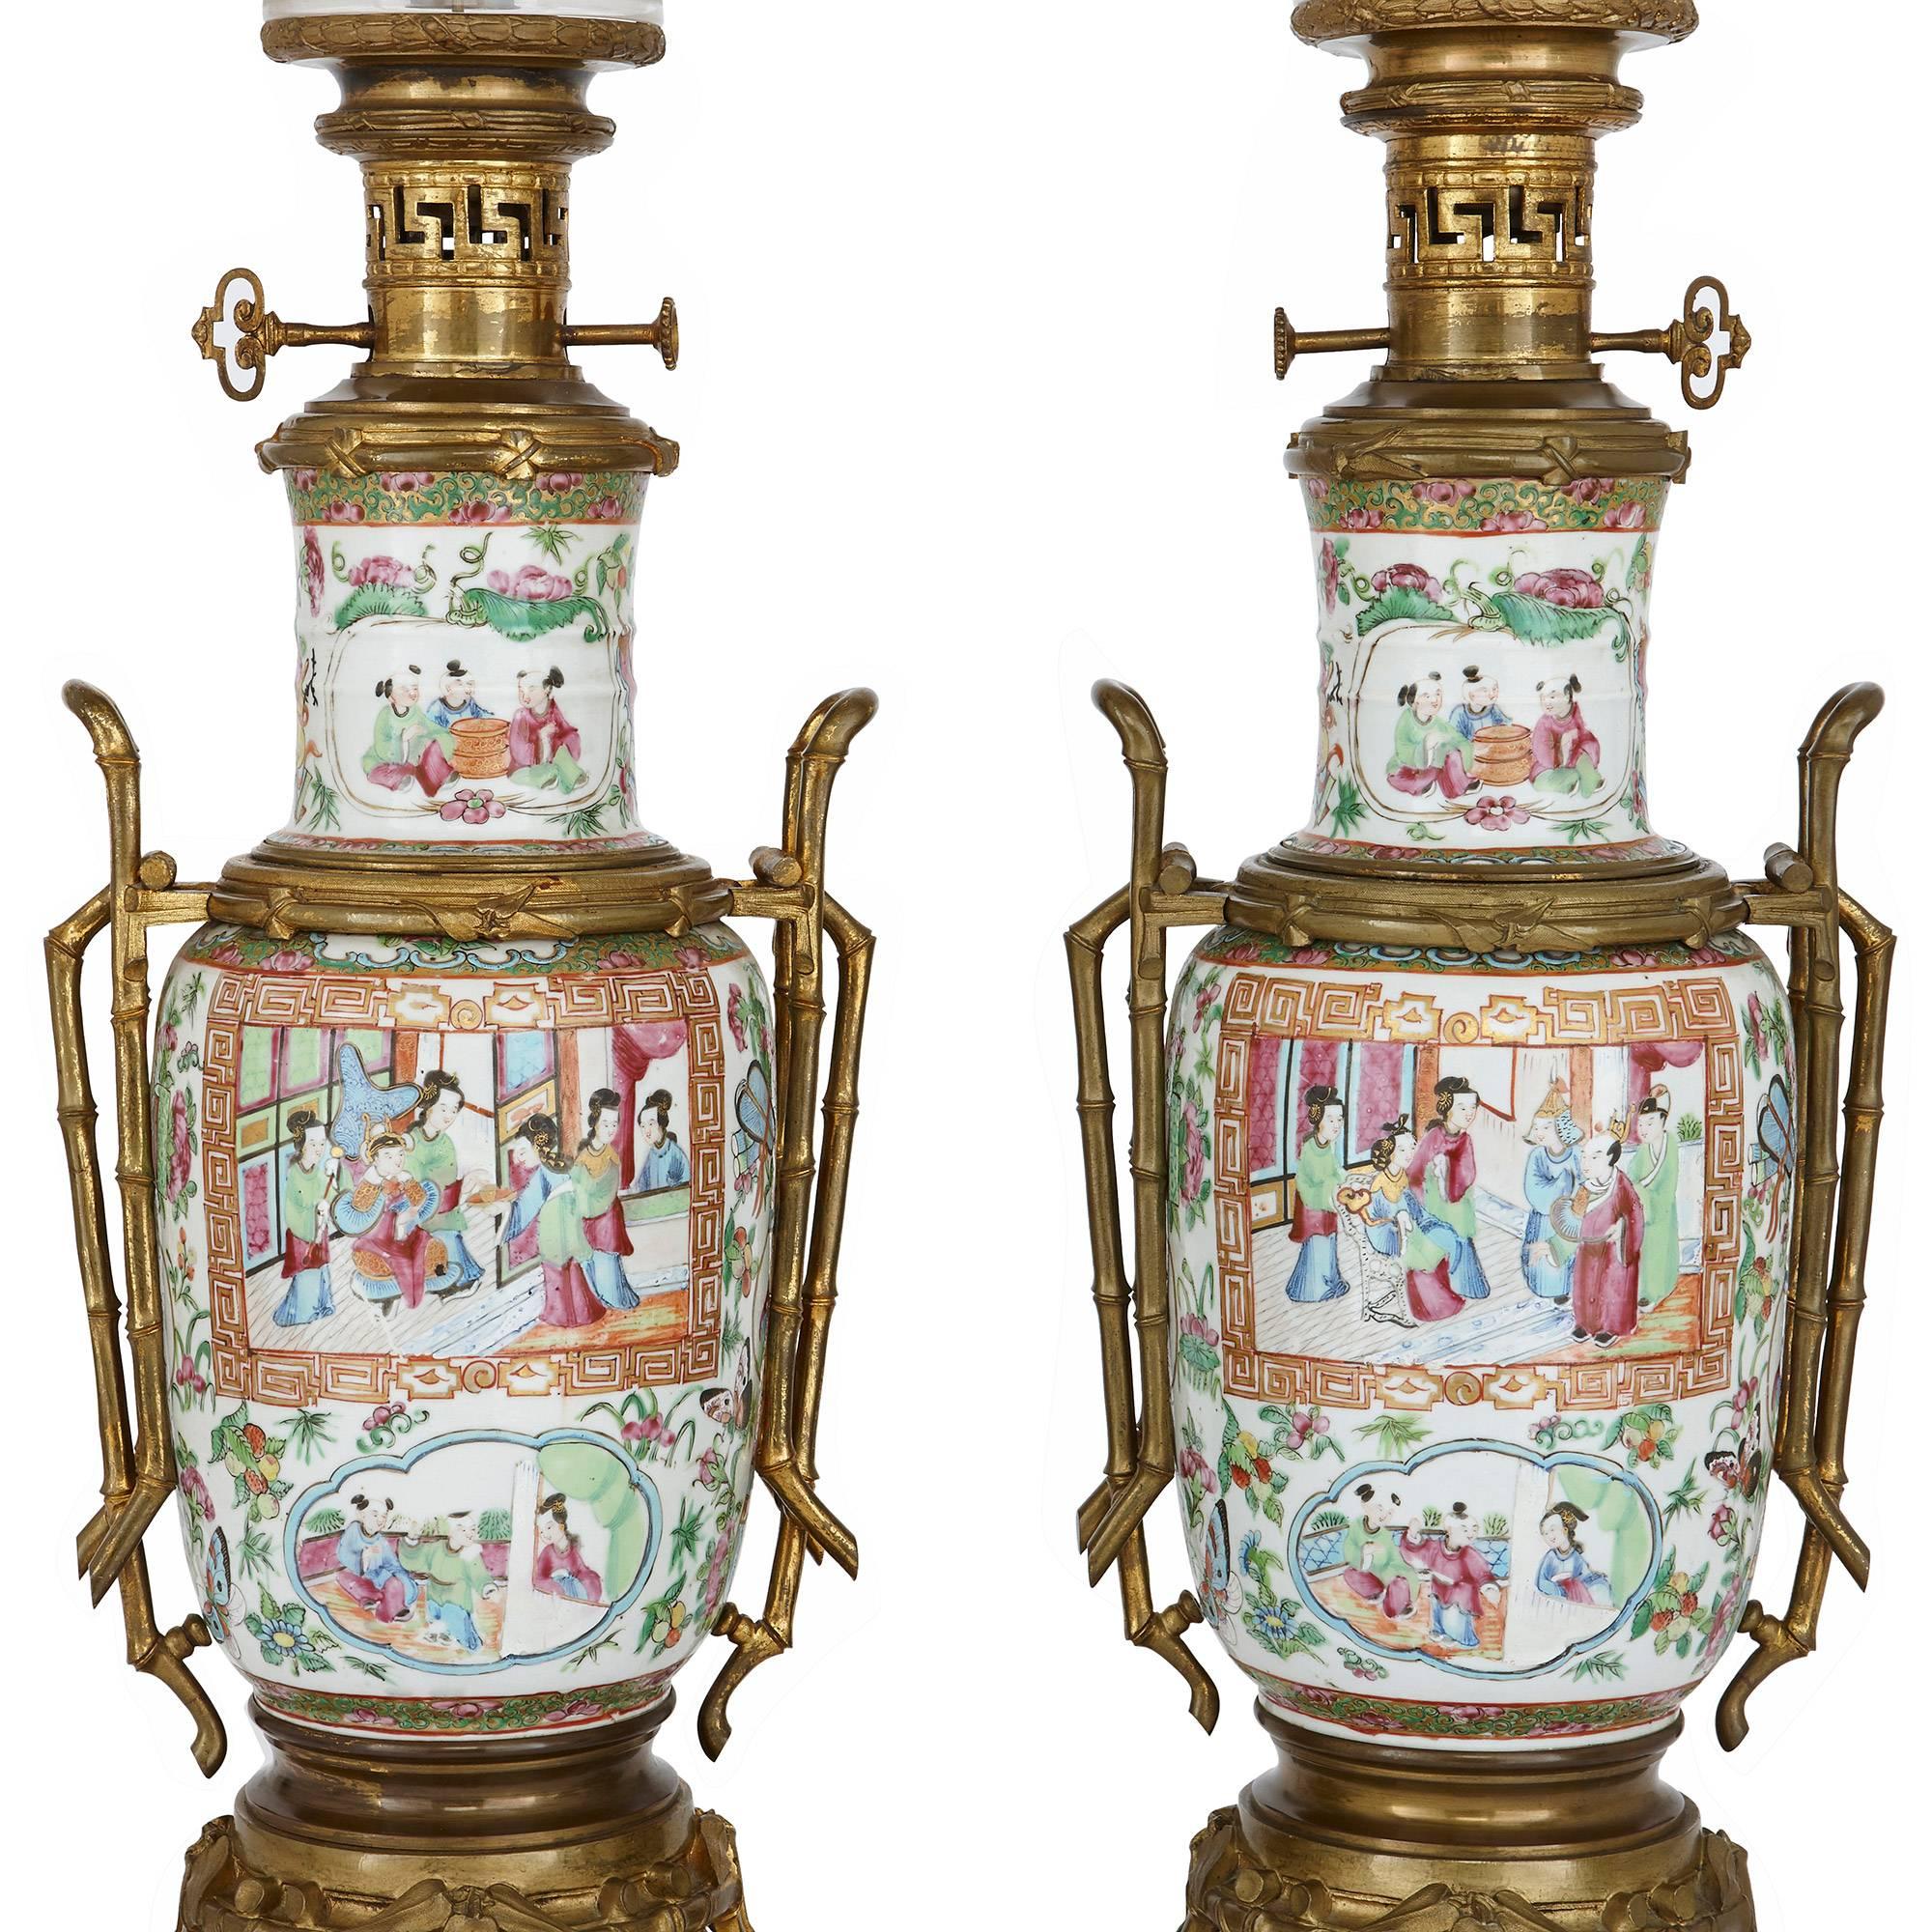 These elegant lamps are crafted from Chinese Canton famille rose porcelain and mounted with French gilt bronze (ormolu). The lamps feature beautiful vase-form porcelain bodies, which are finely painted with Chinese court scenes, as well as flowers,